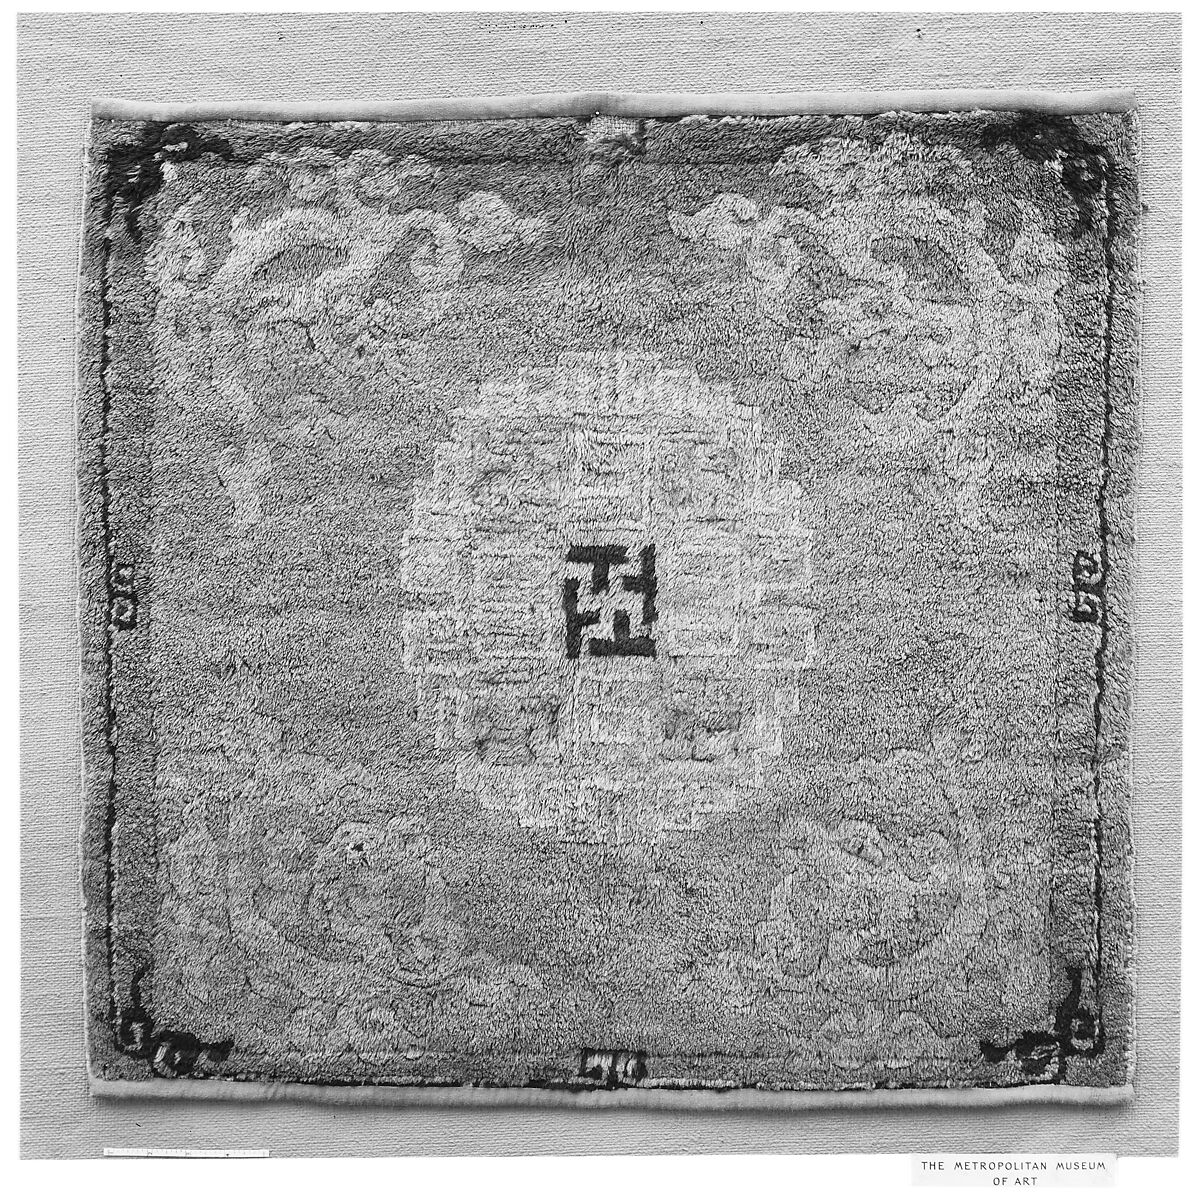 Cushion Cover or Kneeling Mat, Foundation: cotton warp and weft;  wool knotting, China 